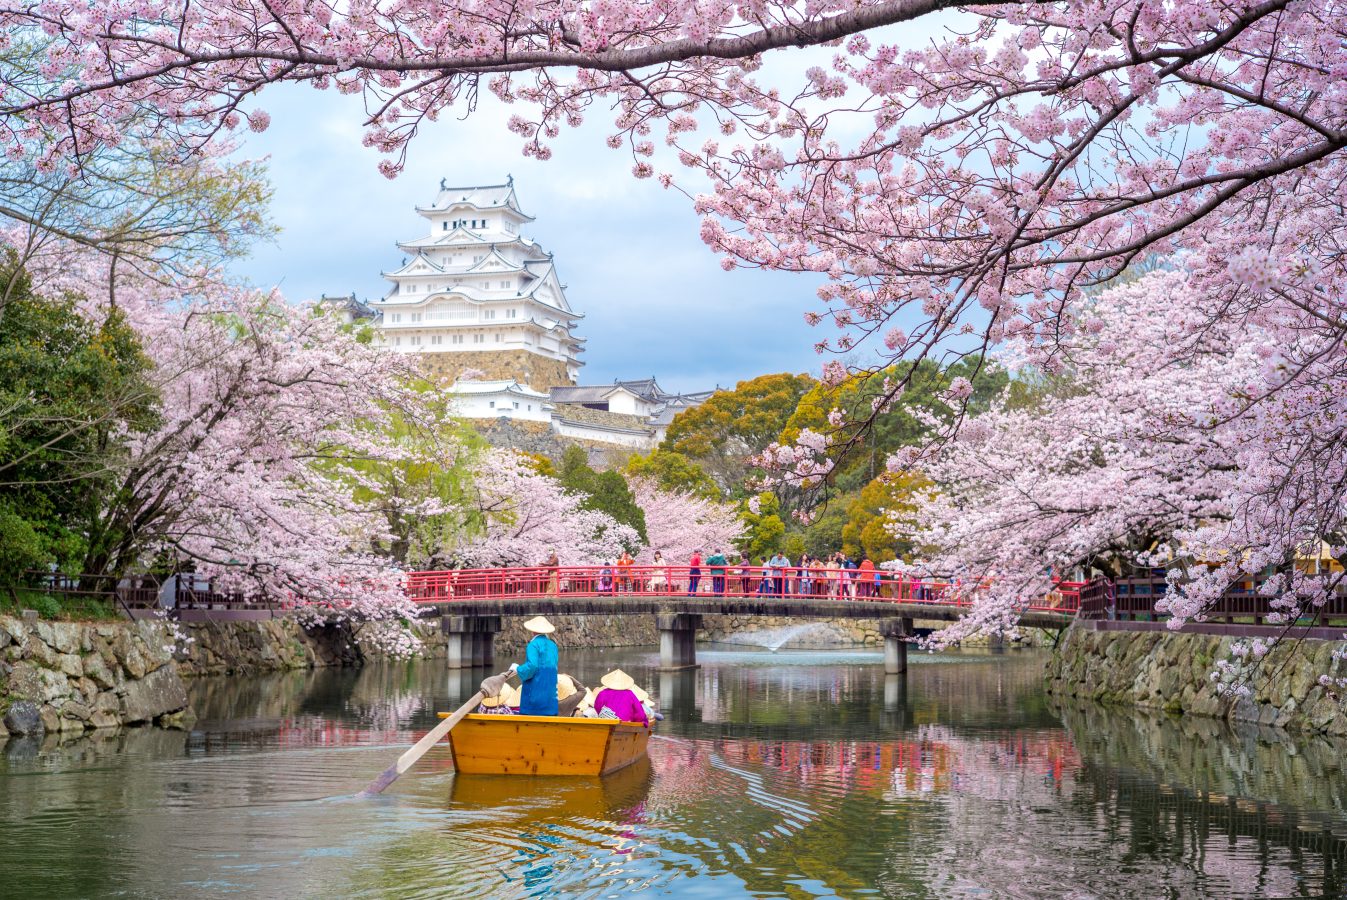 A boat rows along a river in Japan during the spring with cherry blossoms in full bloom and Himeji Castle in the background.